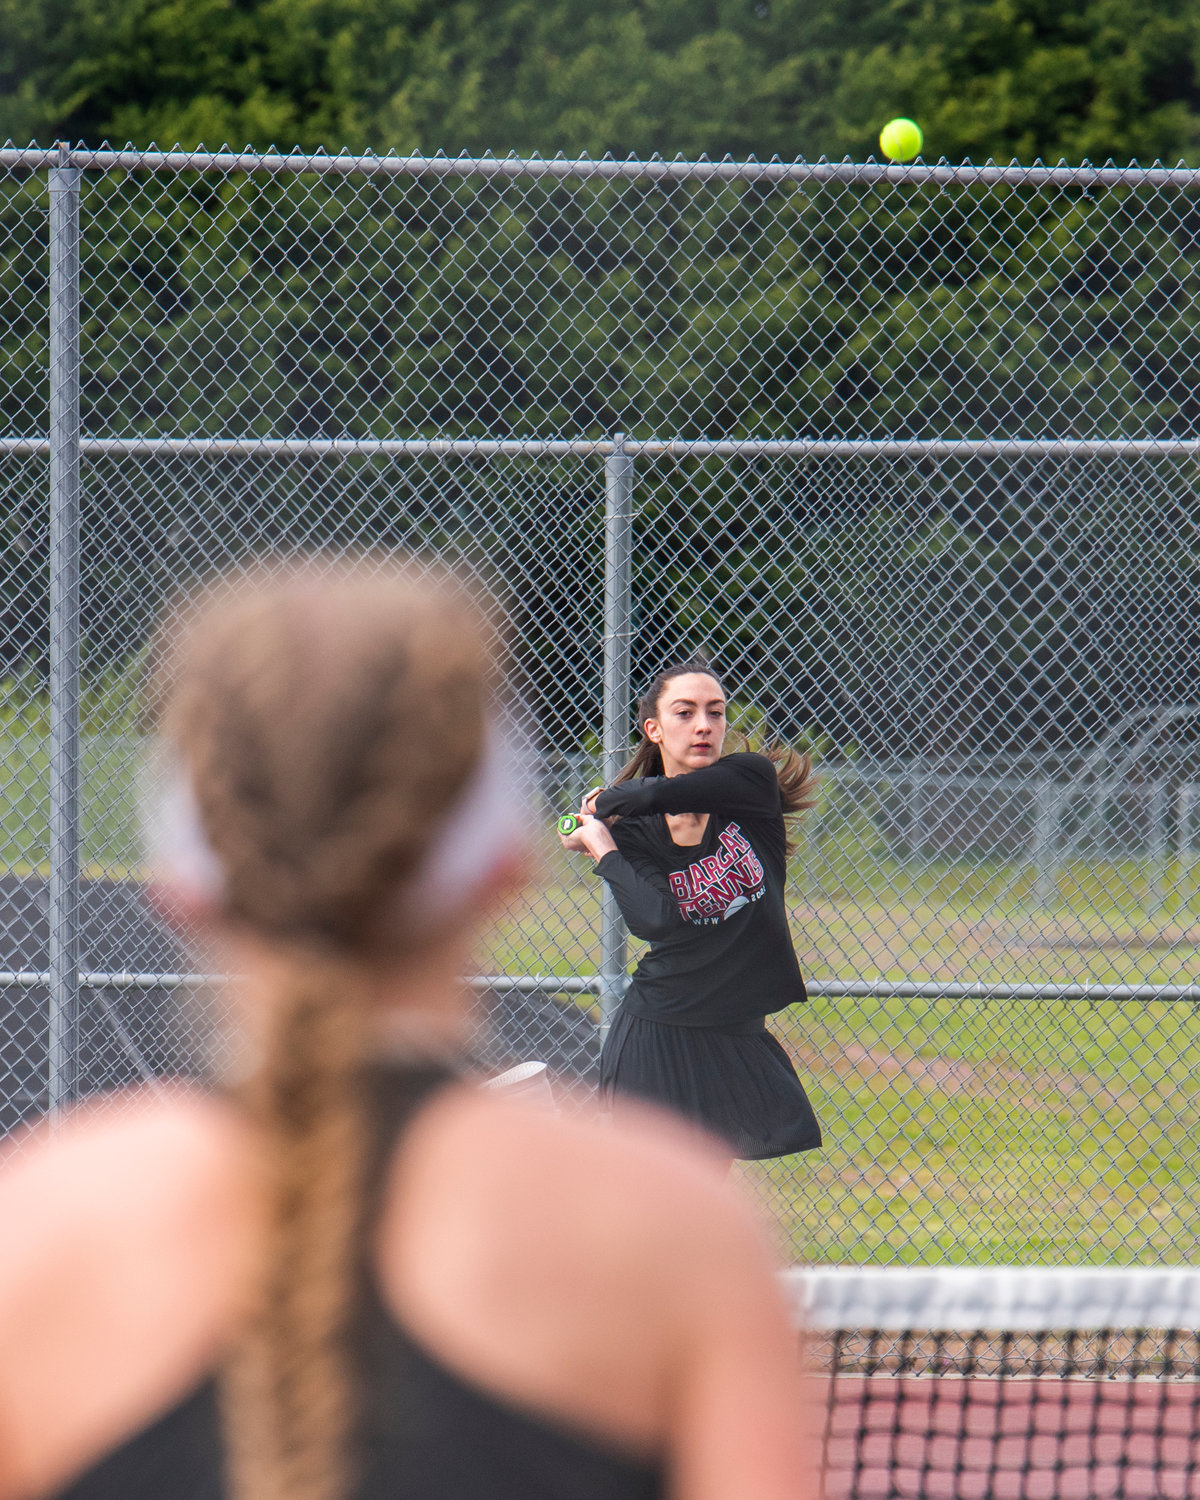 Claire Kuykendall, first singles player for W.F. West, returns a ball during a match at A.G. West Black Hills High School Tuesday afternoon in Tumwater.